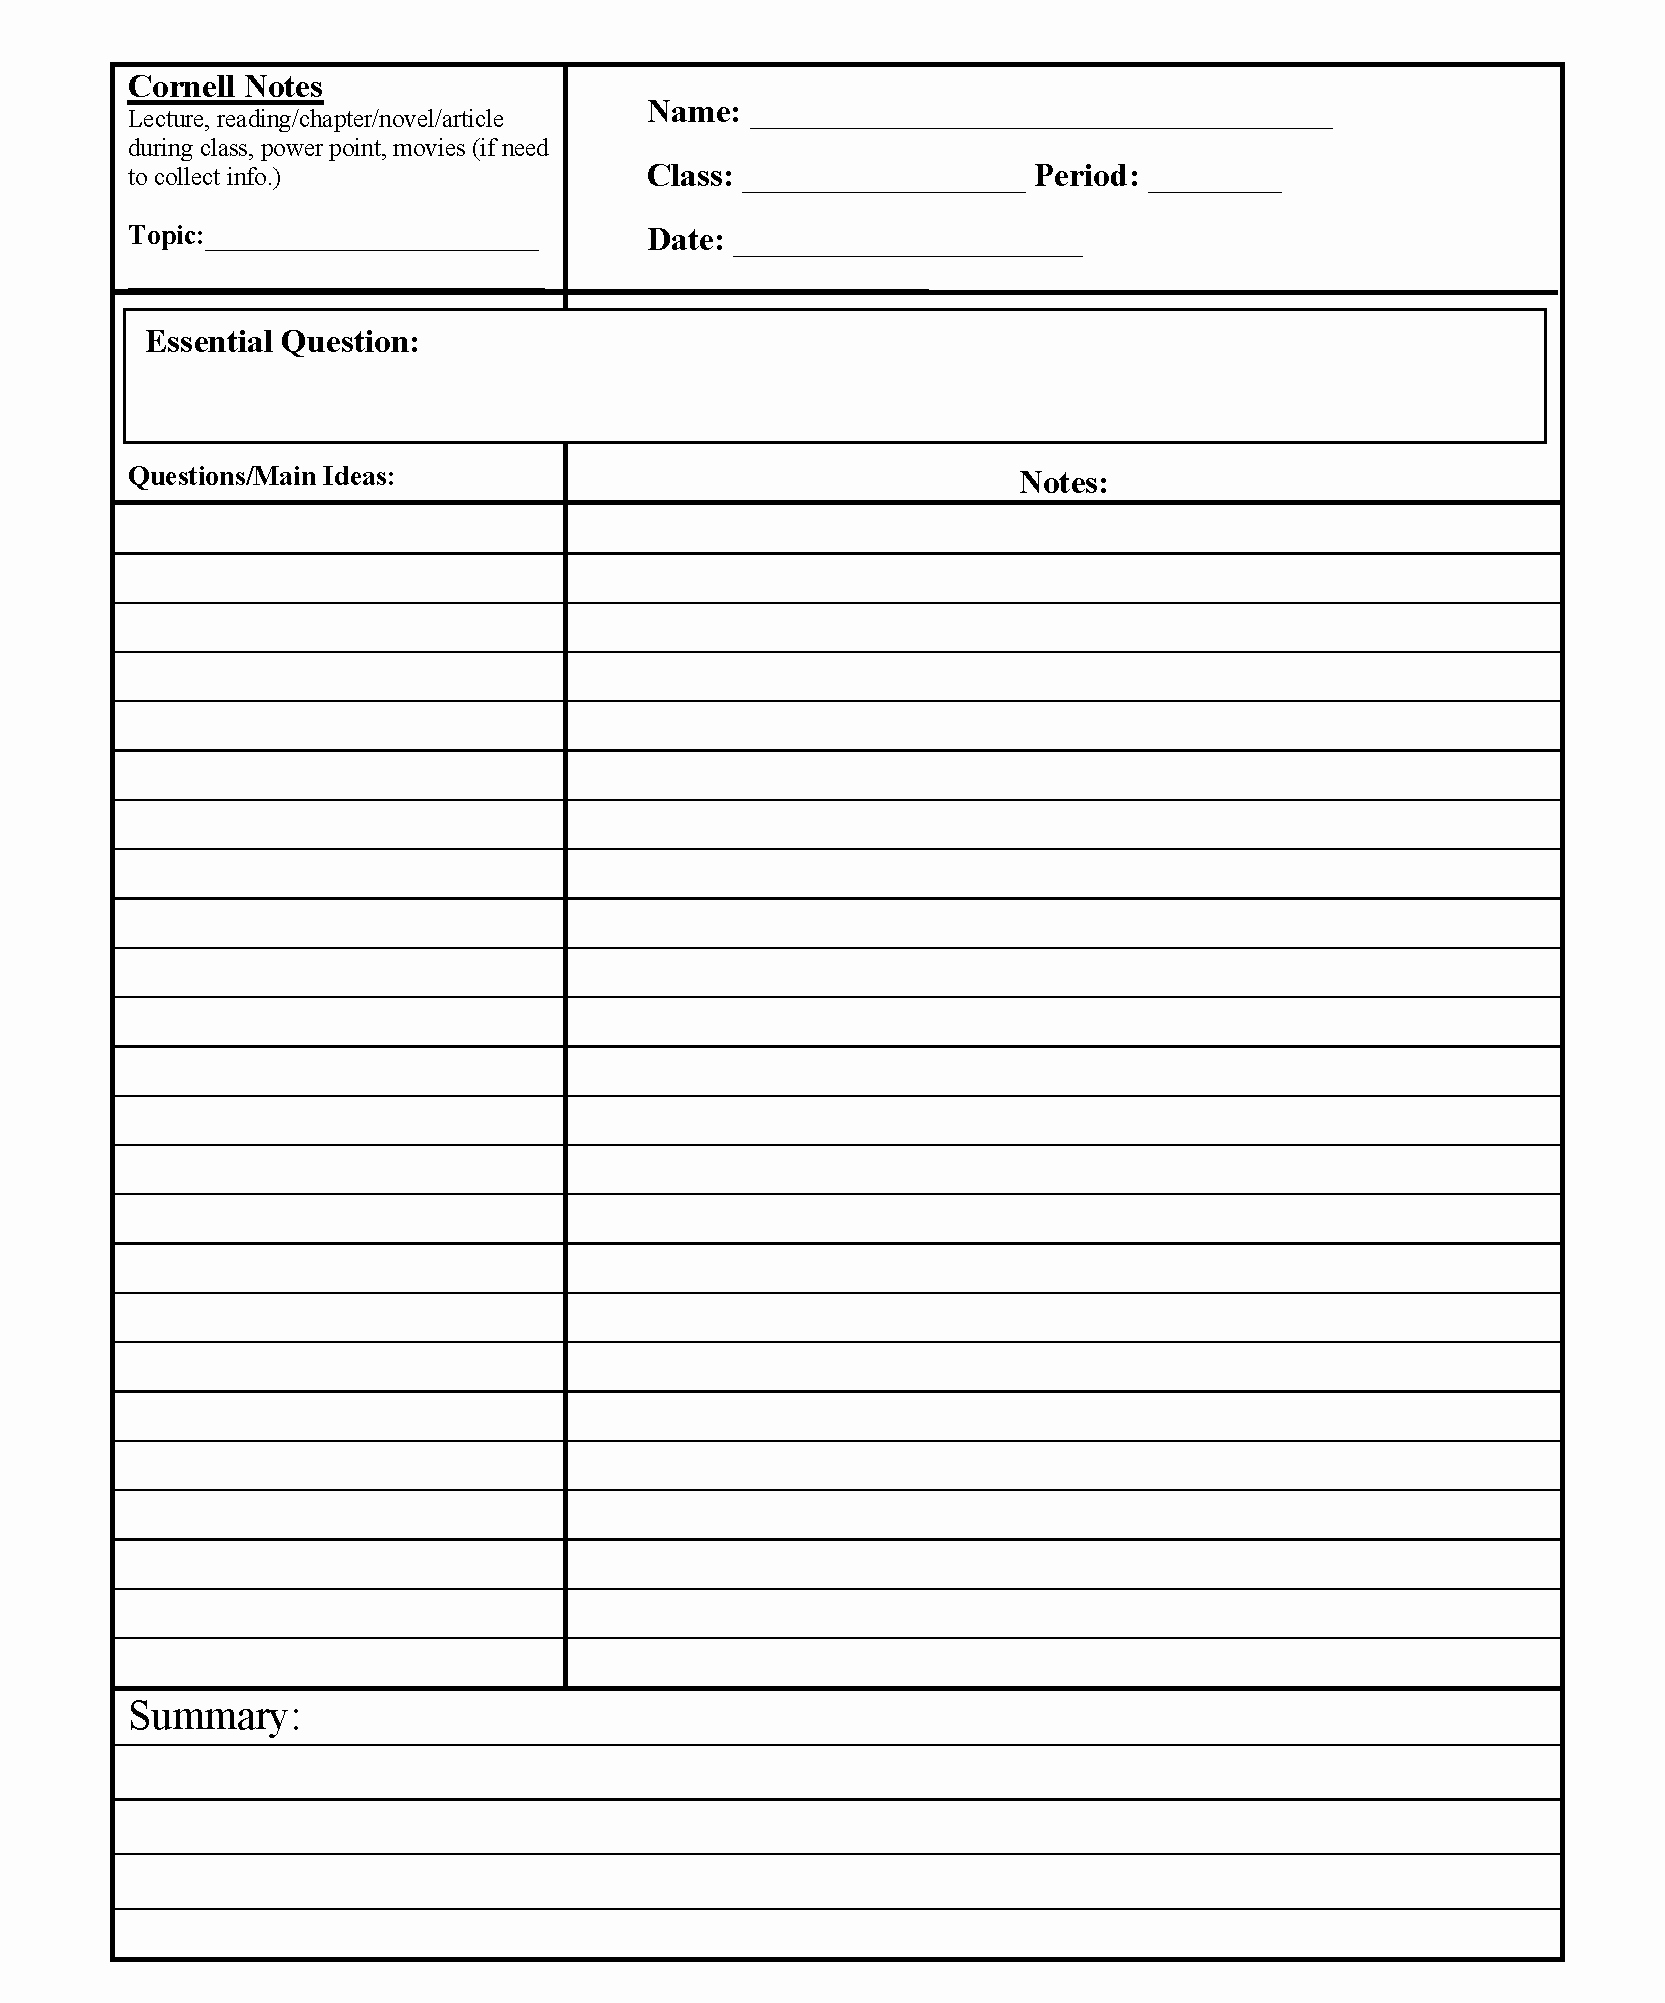 Note Taking Template Word Fresh Blank Cornell Notes Template Notes Word Doc